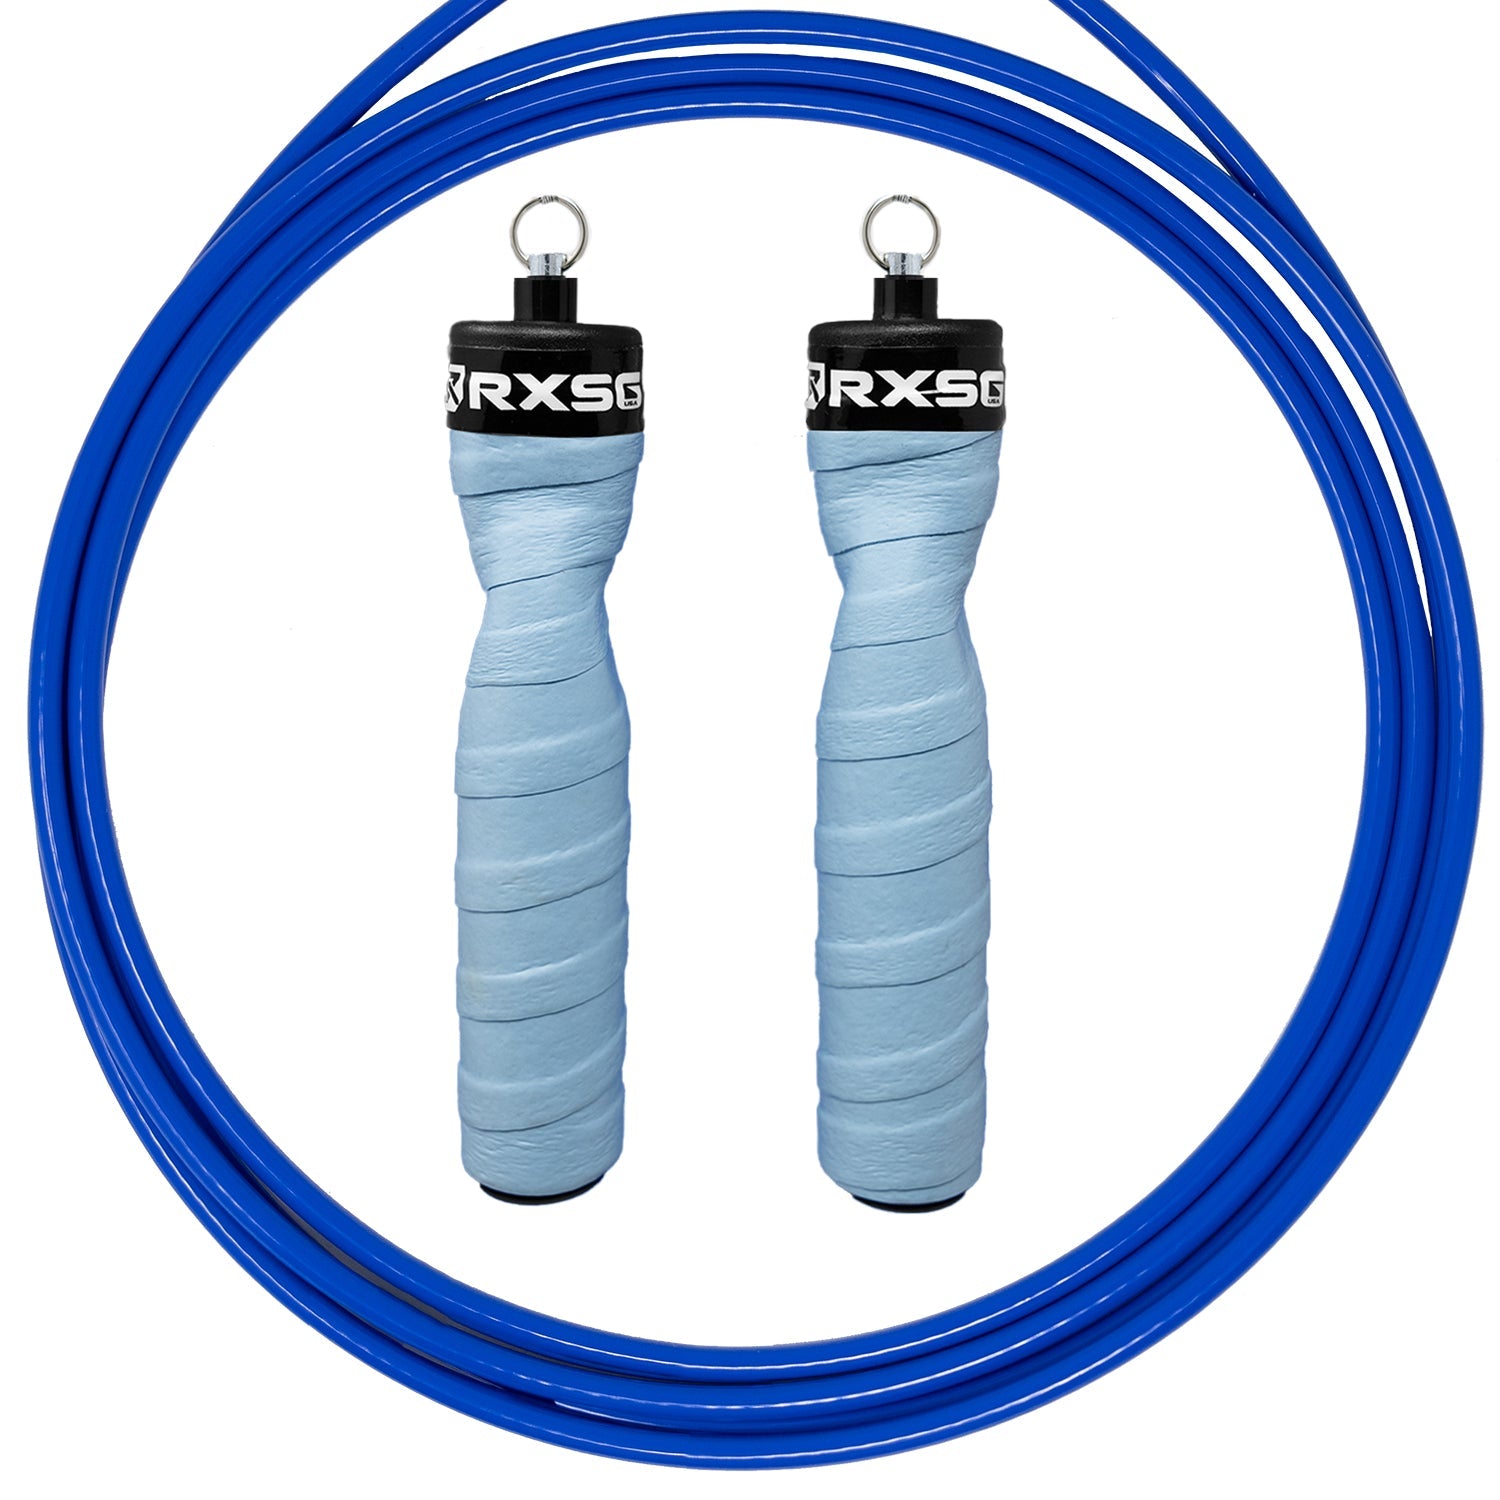 CustomFit Skye Jump Rope with blue cable